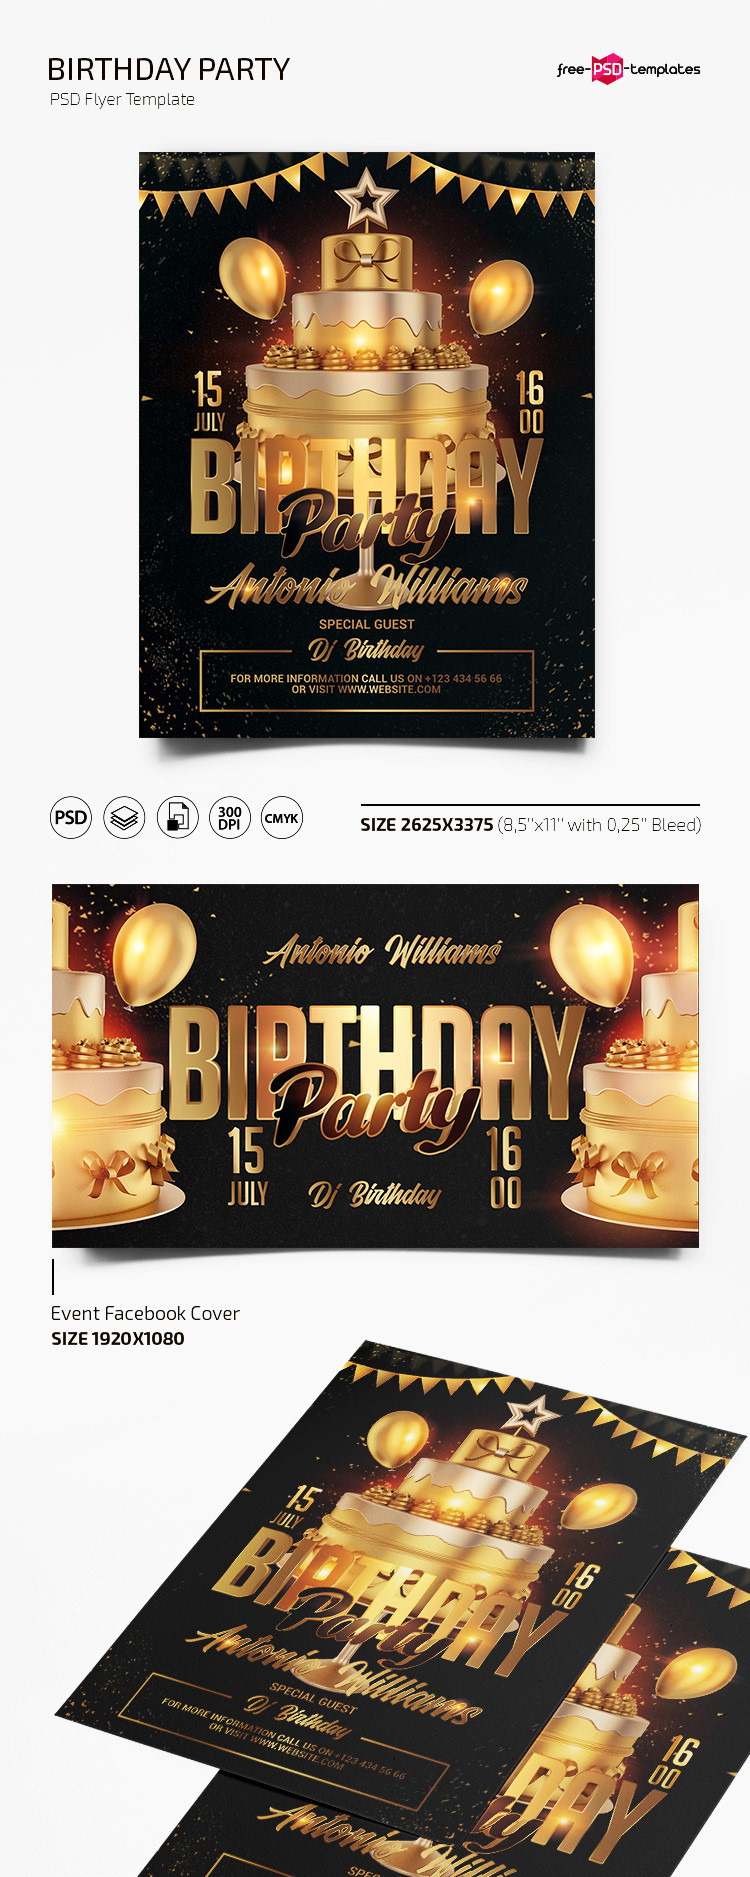 FREE BIRTHDAY PARTY FLYER TEMPLATE IN PSD on Behance With Regard To Free Birthday Flyer Templates